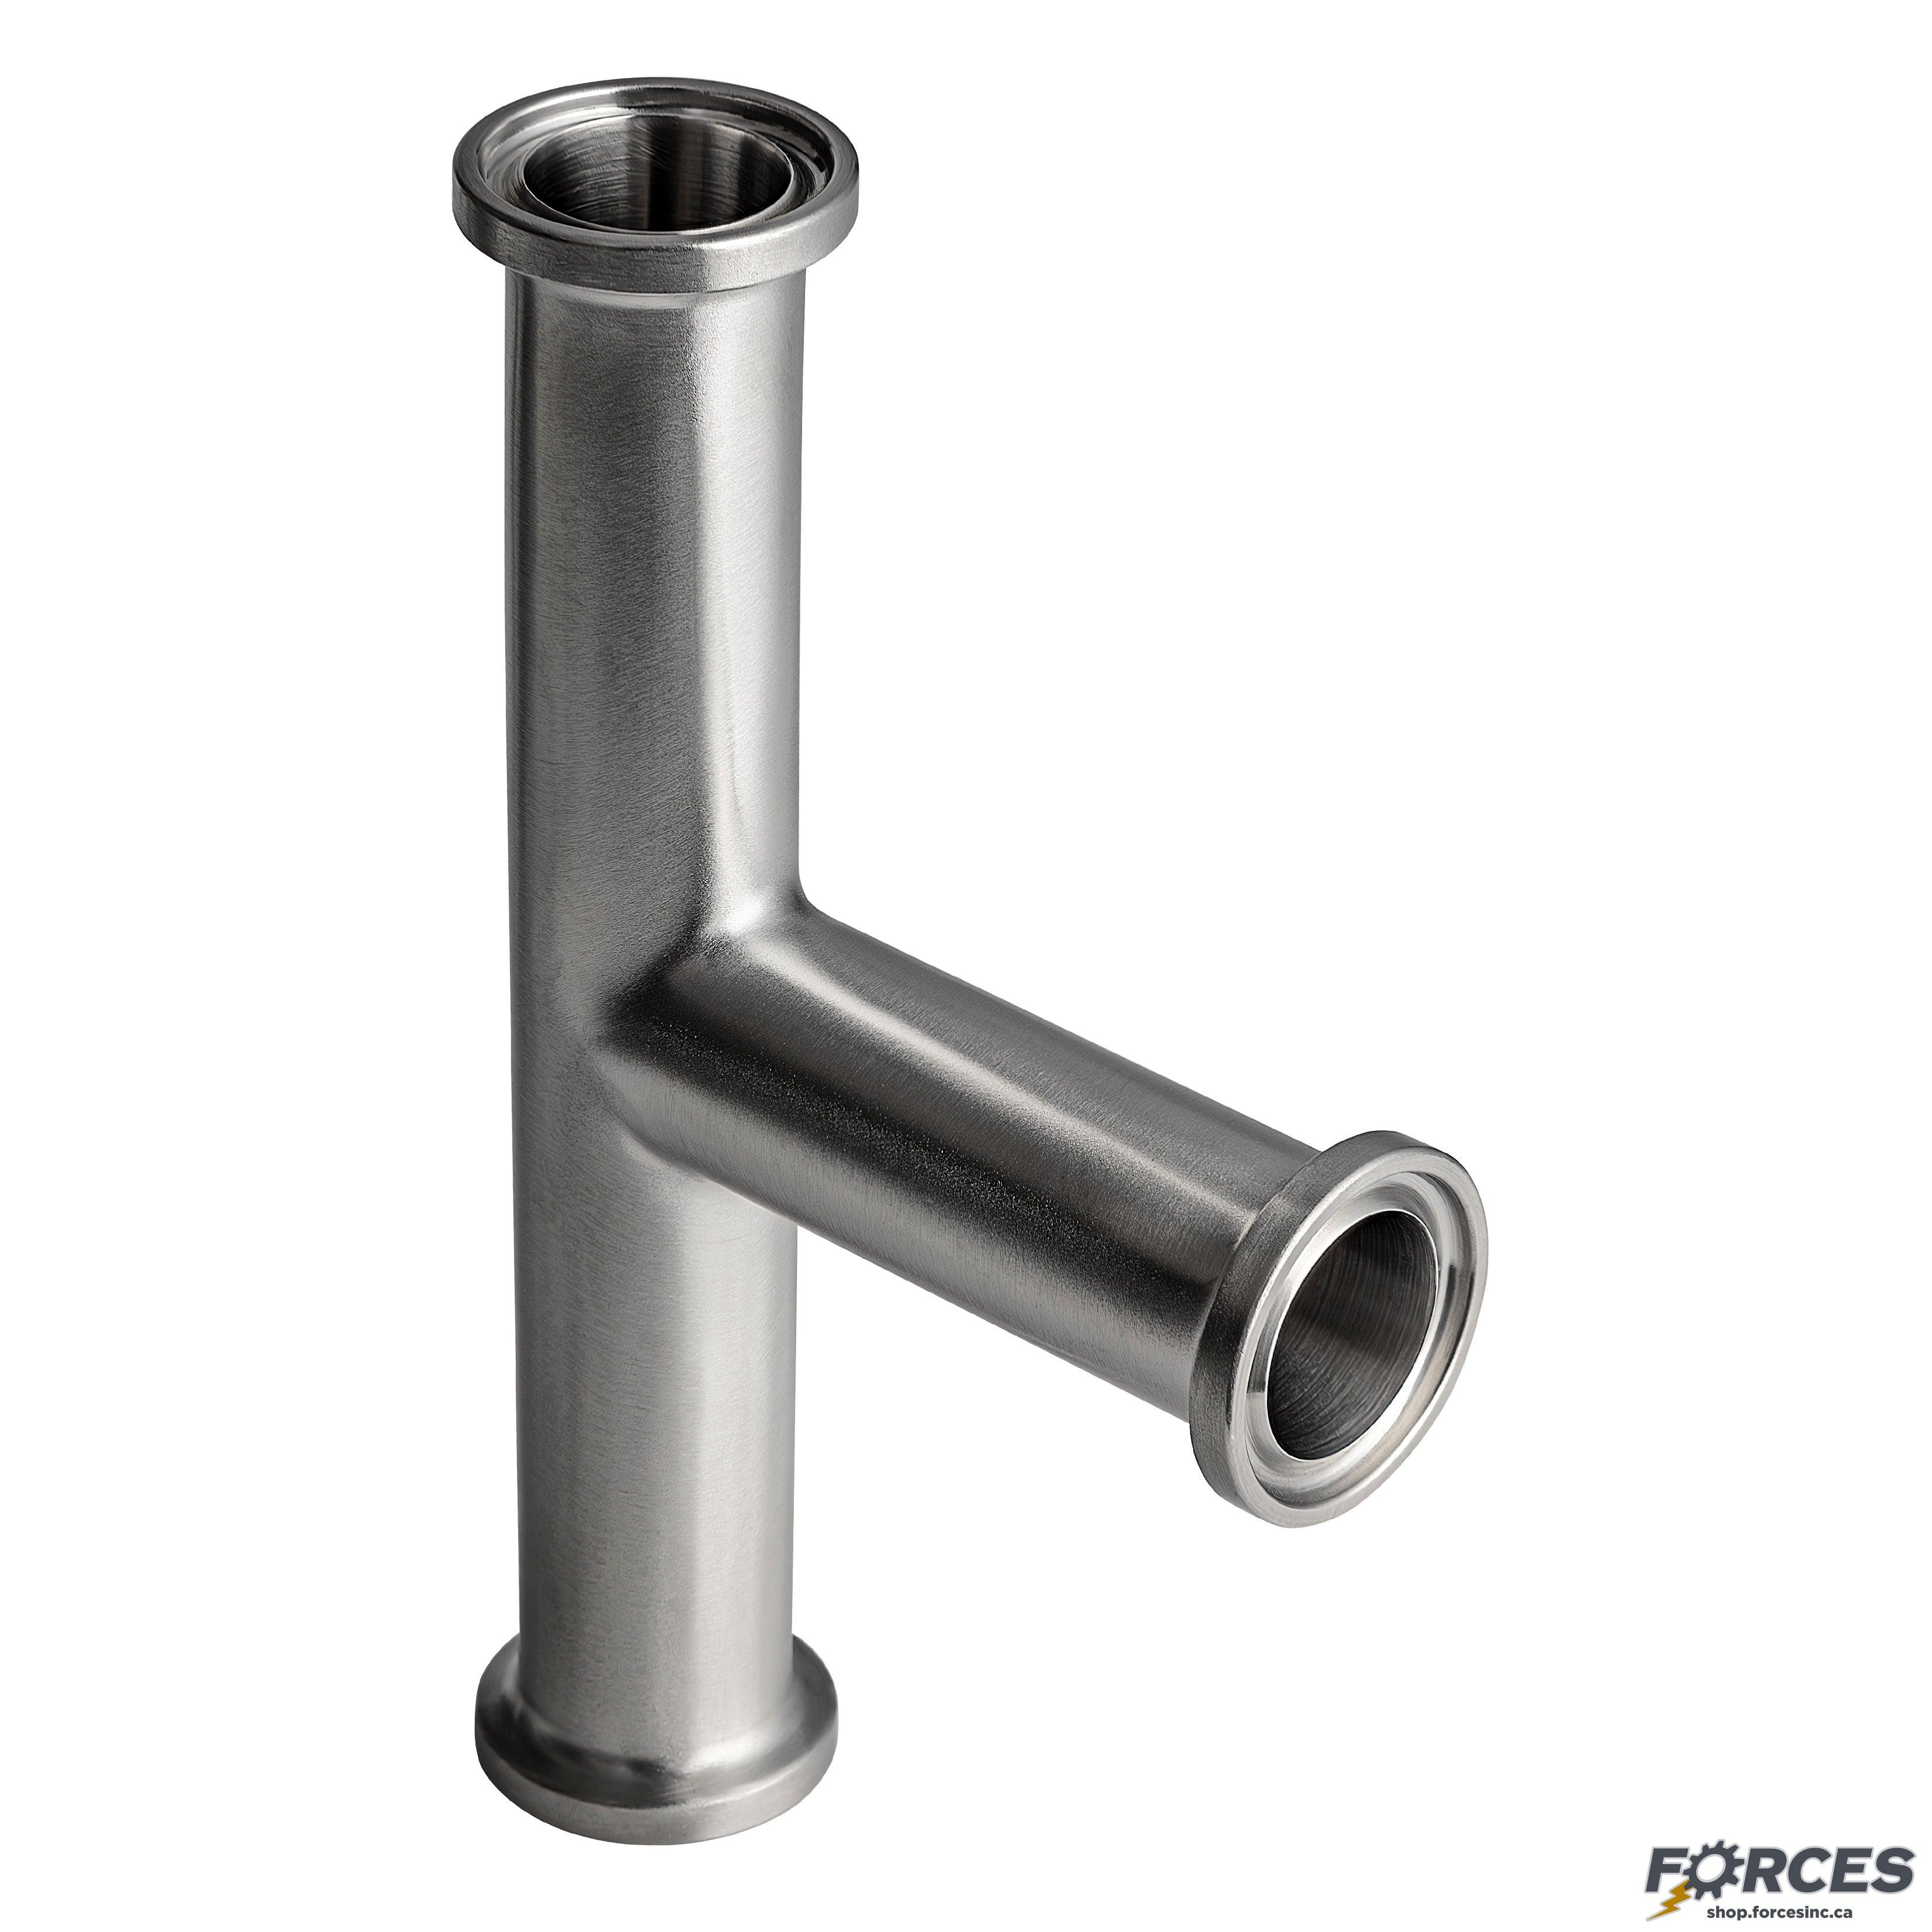 1" Tri-Clamp Tee - Stainless Steel 316 - Forces Inc